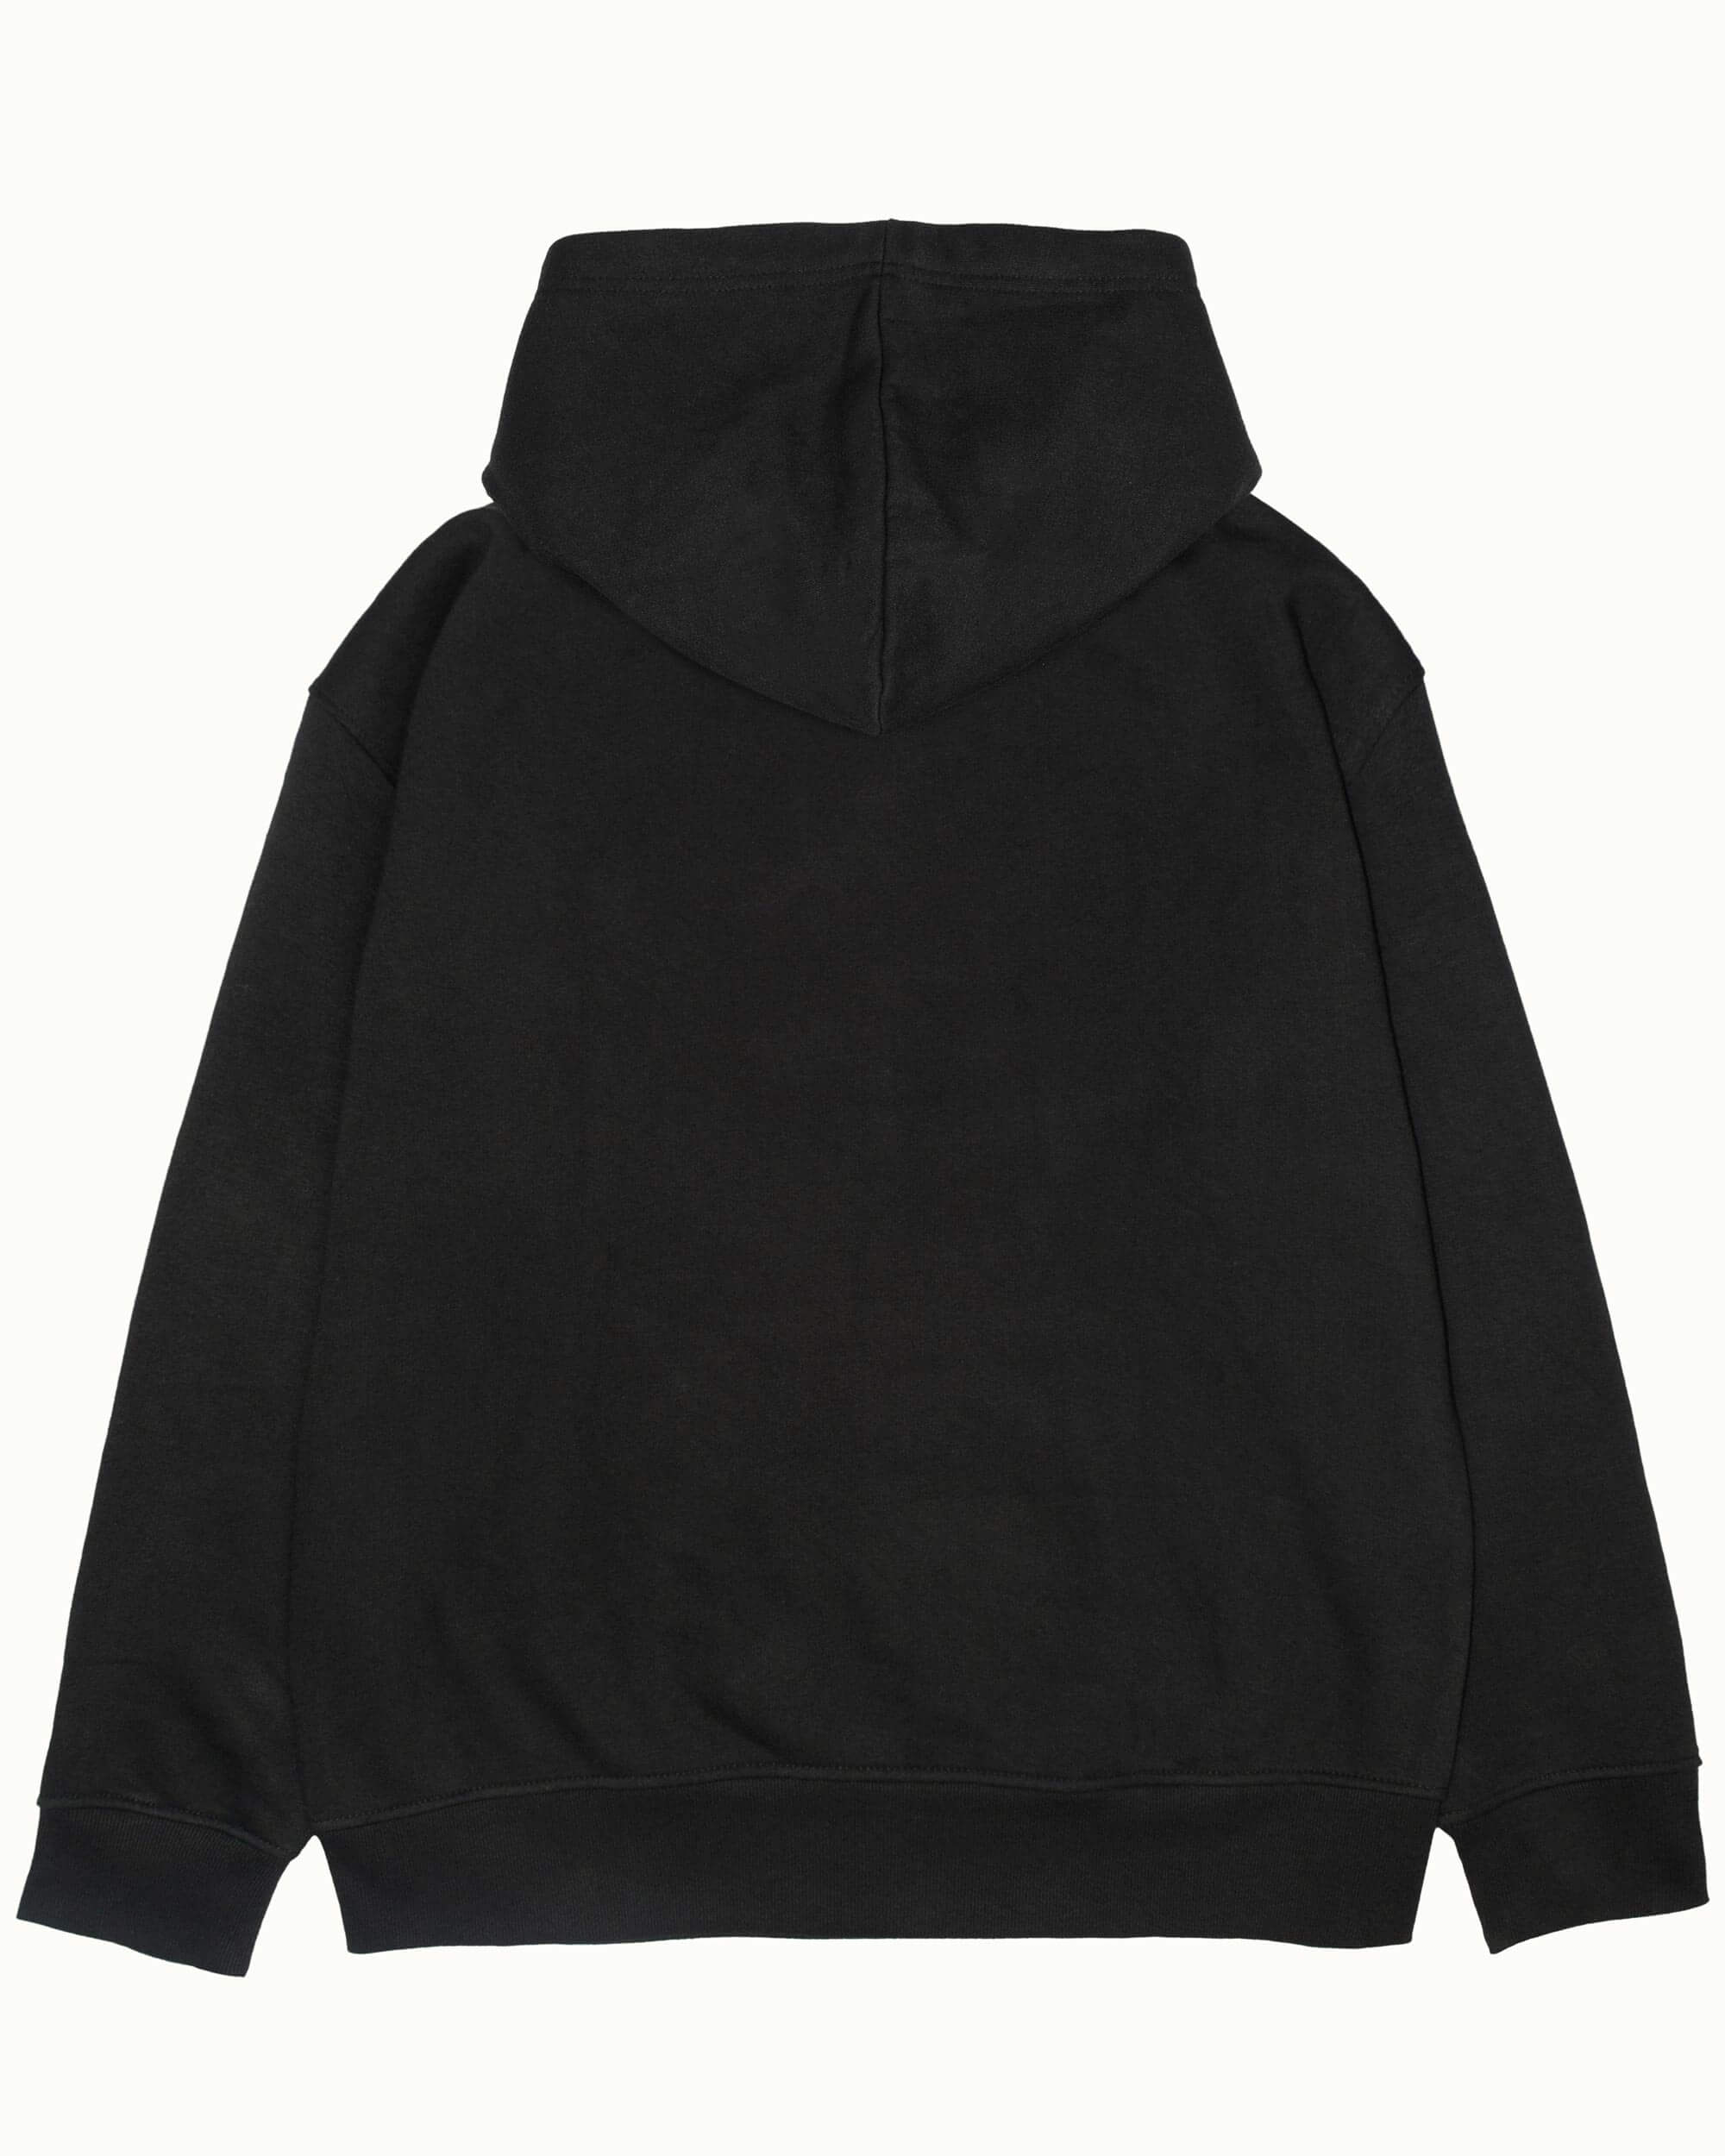 The Perfect Blank Hoodie